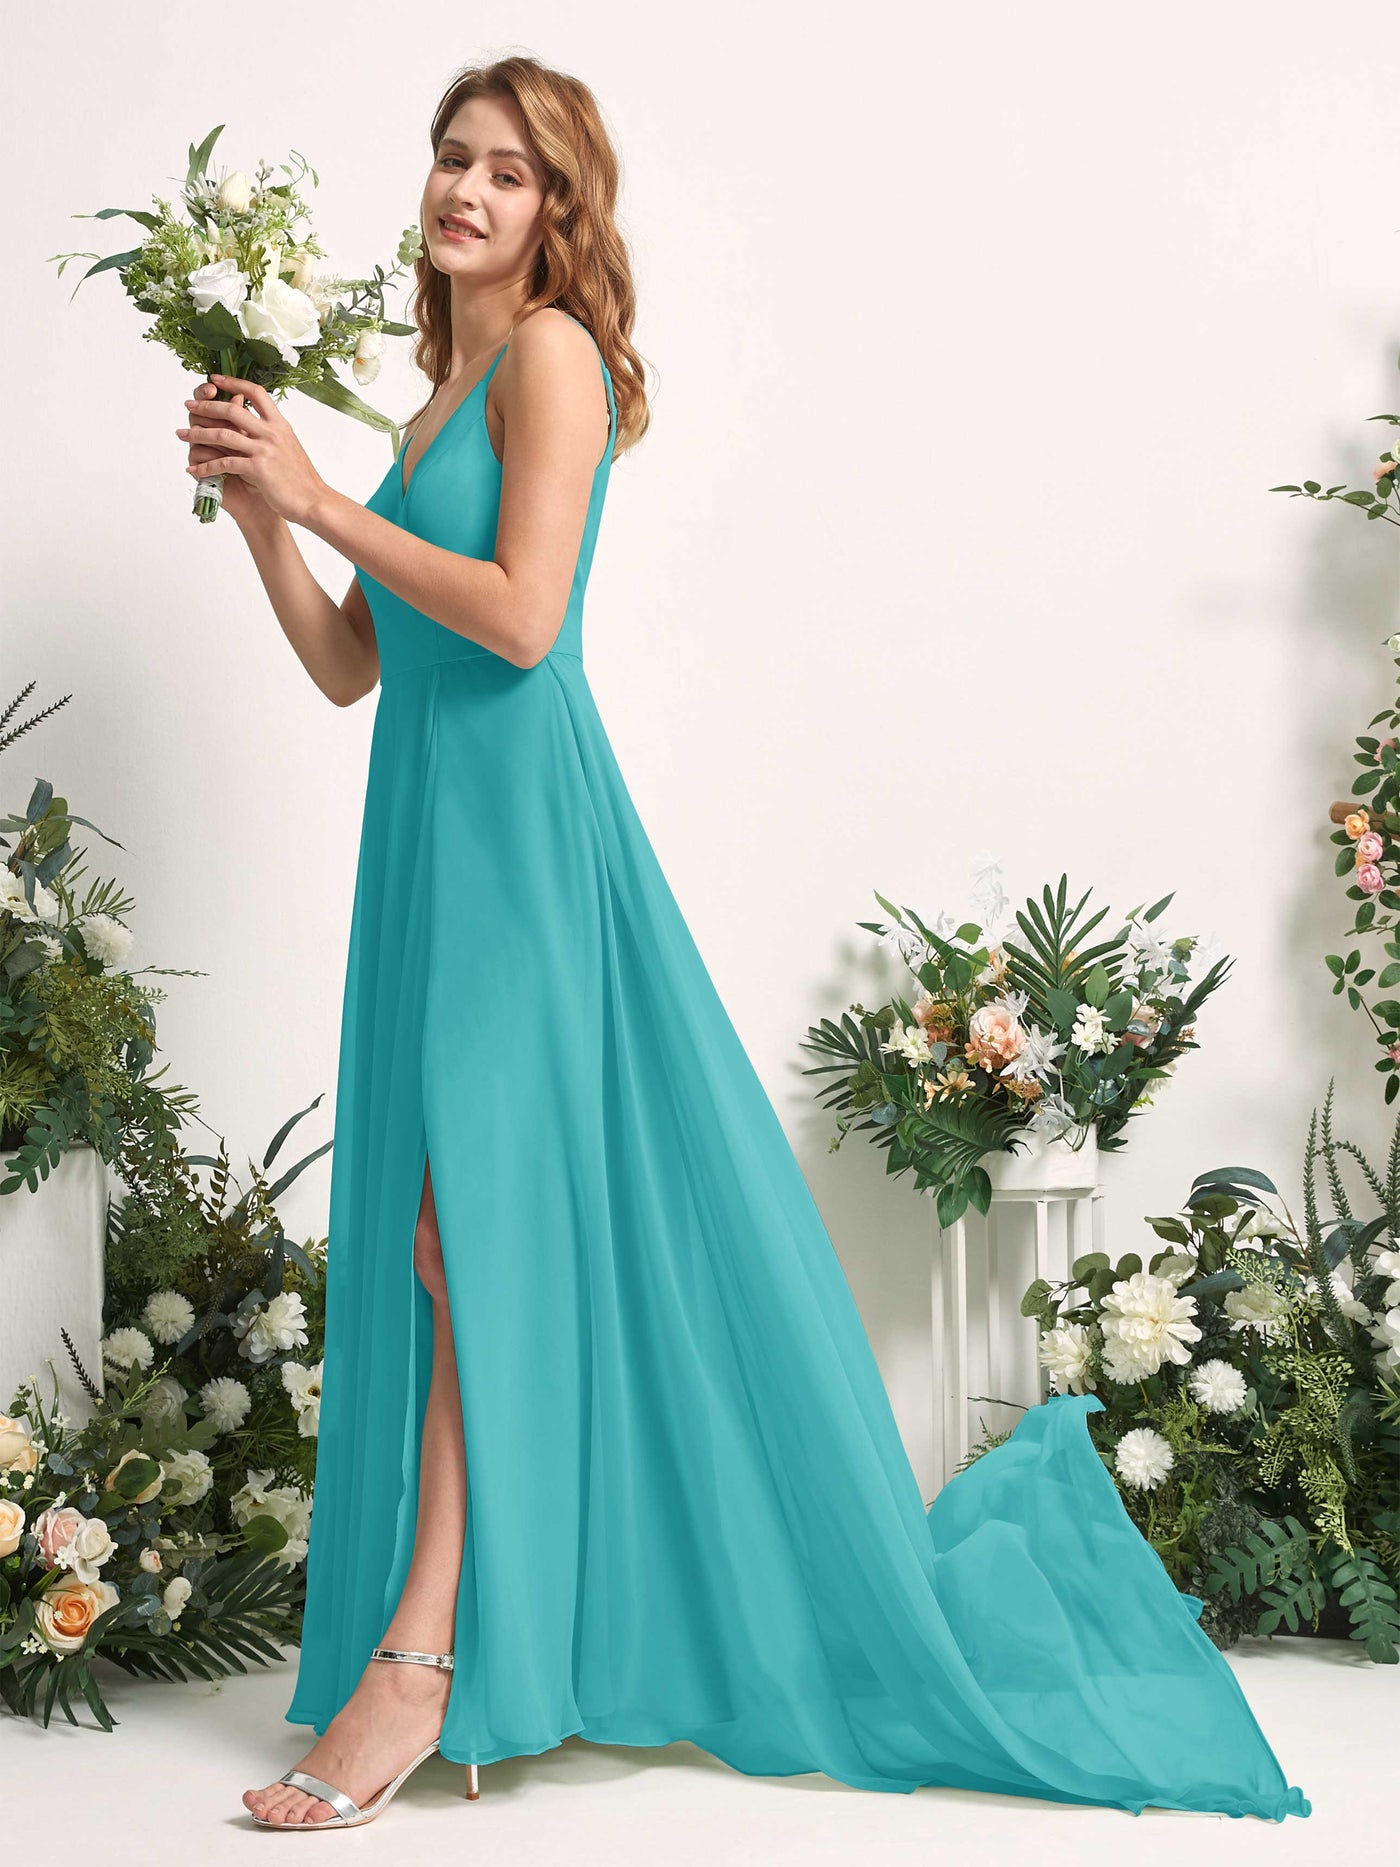 Bridesmaid Dress A-line Chiffon Spaghetti-straps Full Length Sleeveless Wedding Party Dress - Turquoise (81227723)#color_turquoise